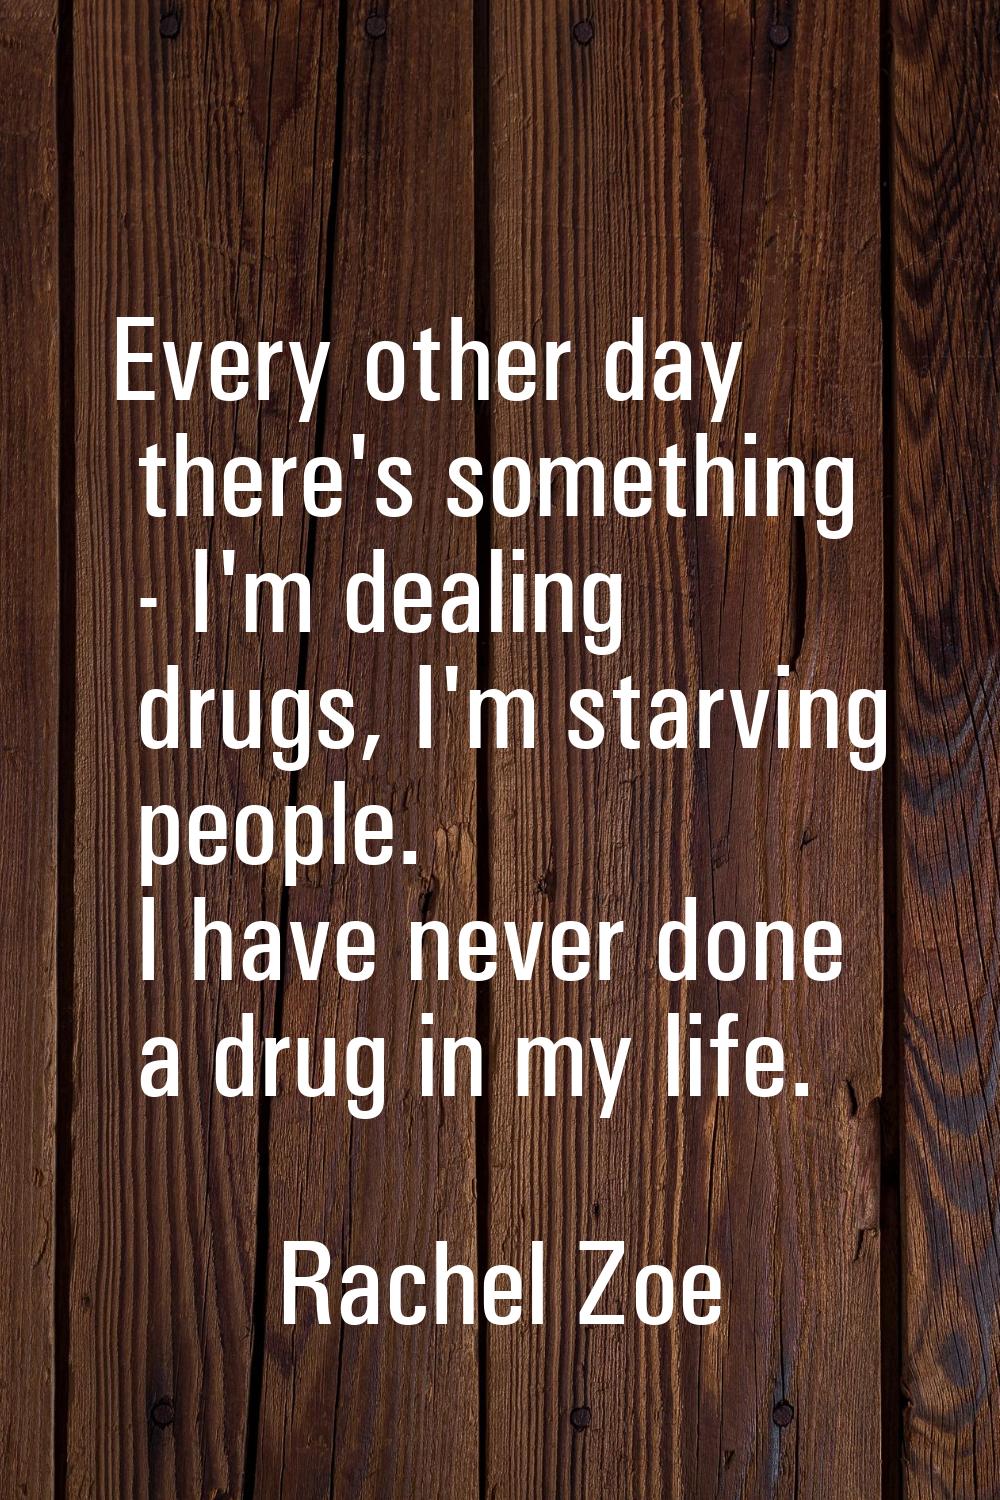 Every other day there's something - I'm dealing drugs, I'm starving people. I have never done a dru